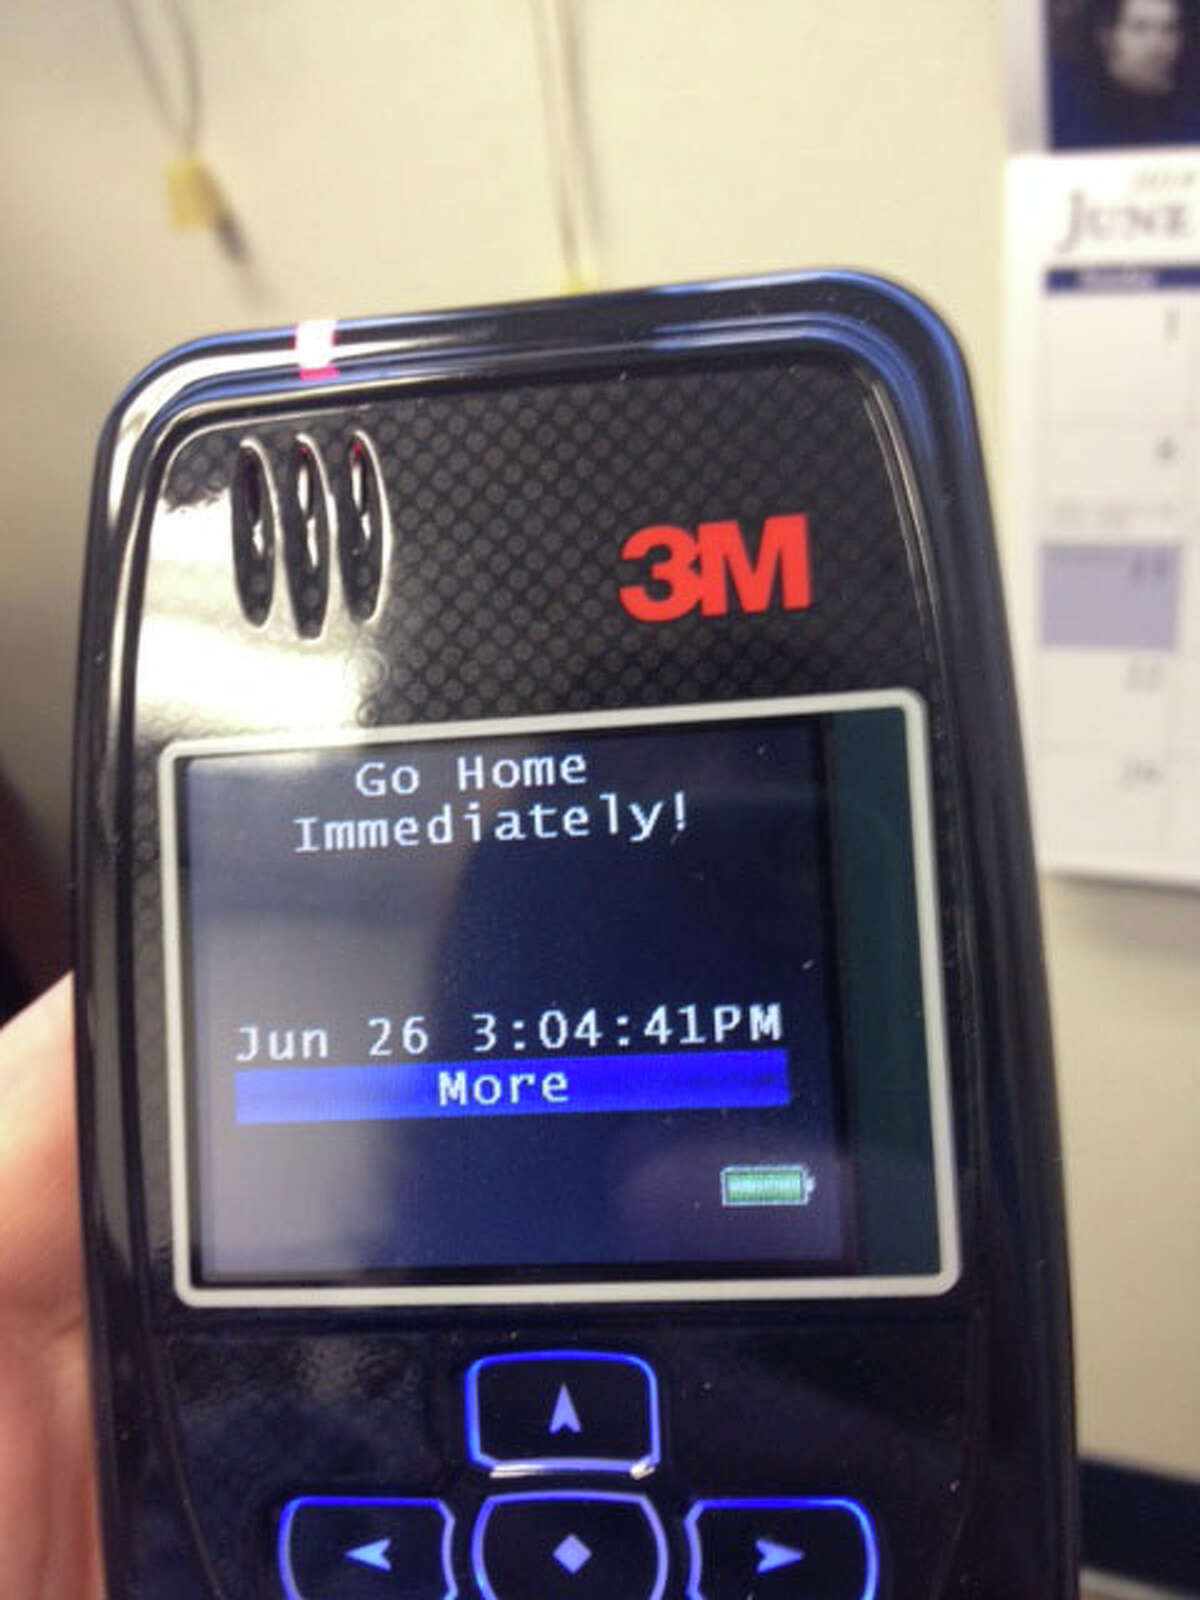 Marsha McLane is testing out a new GPS monitoring system on herself. She received this text after going to a prohibited area.